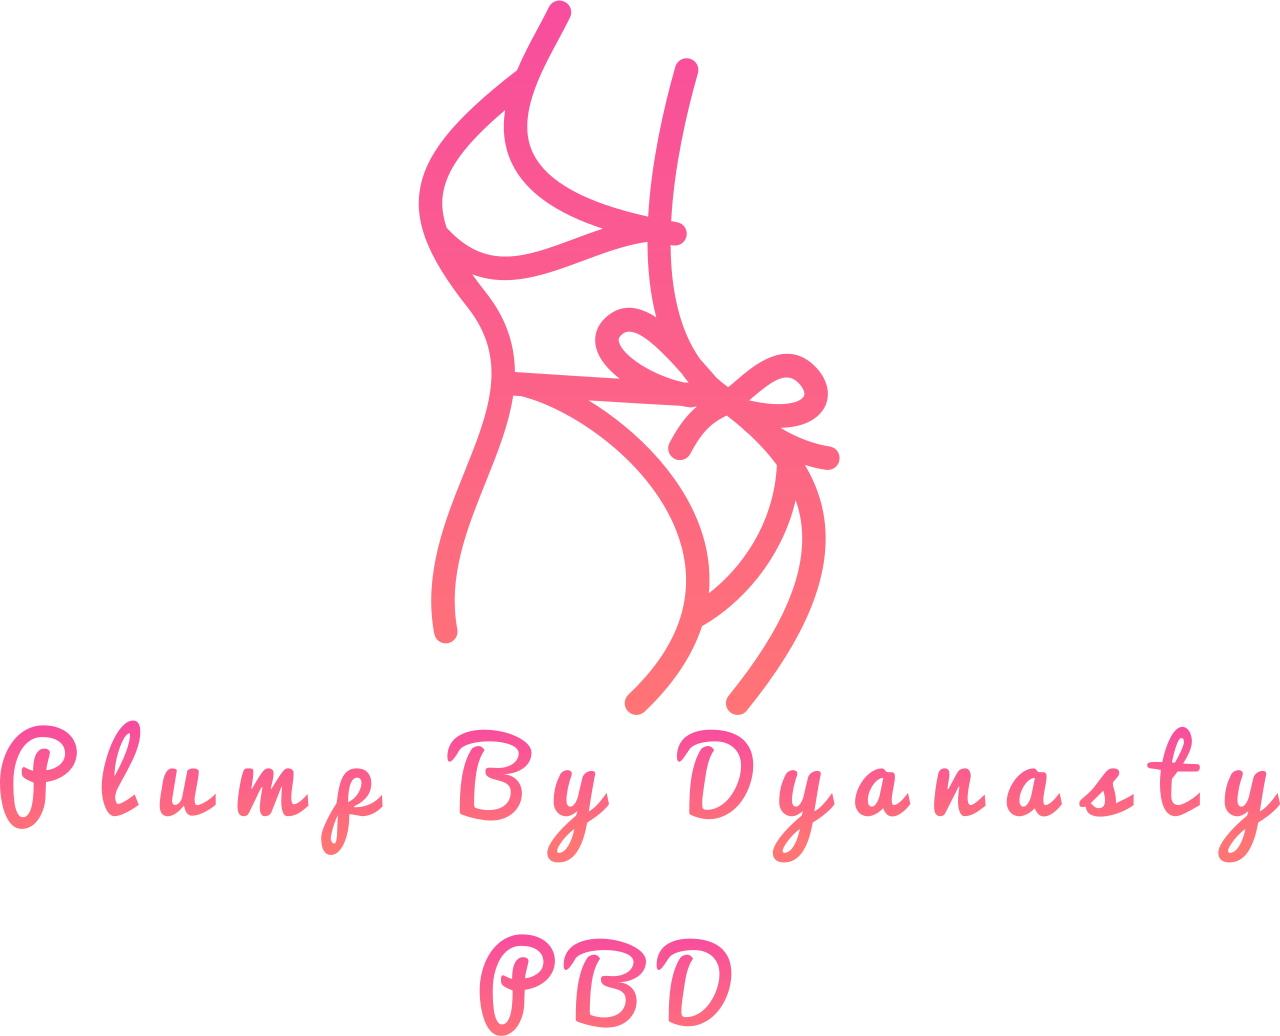 Plump By Dyanasty 's web page